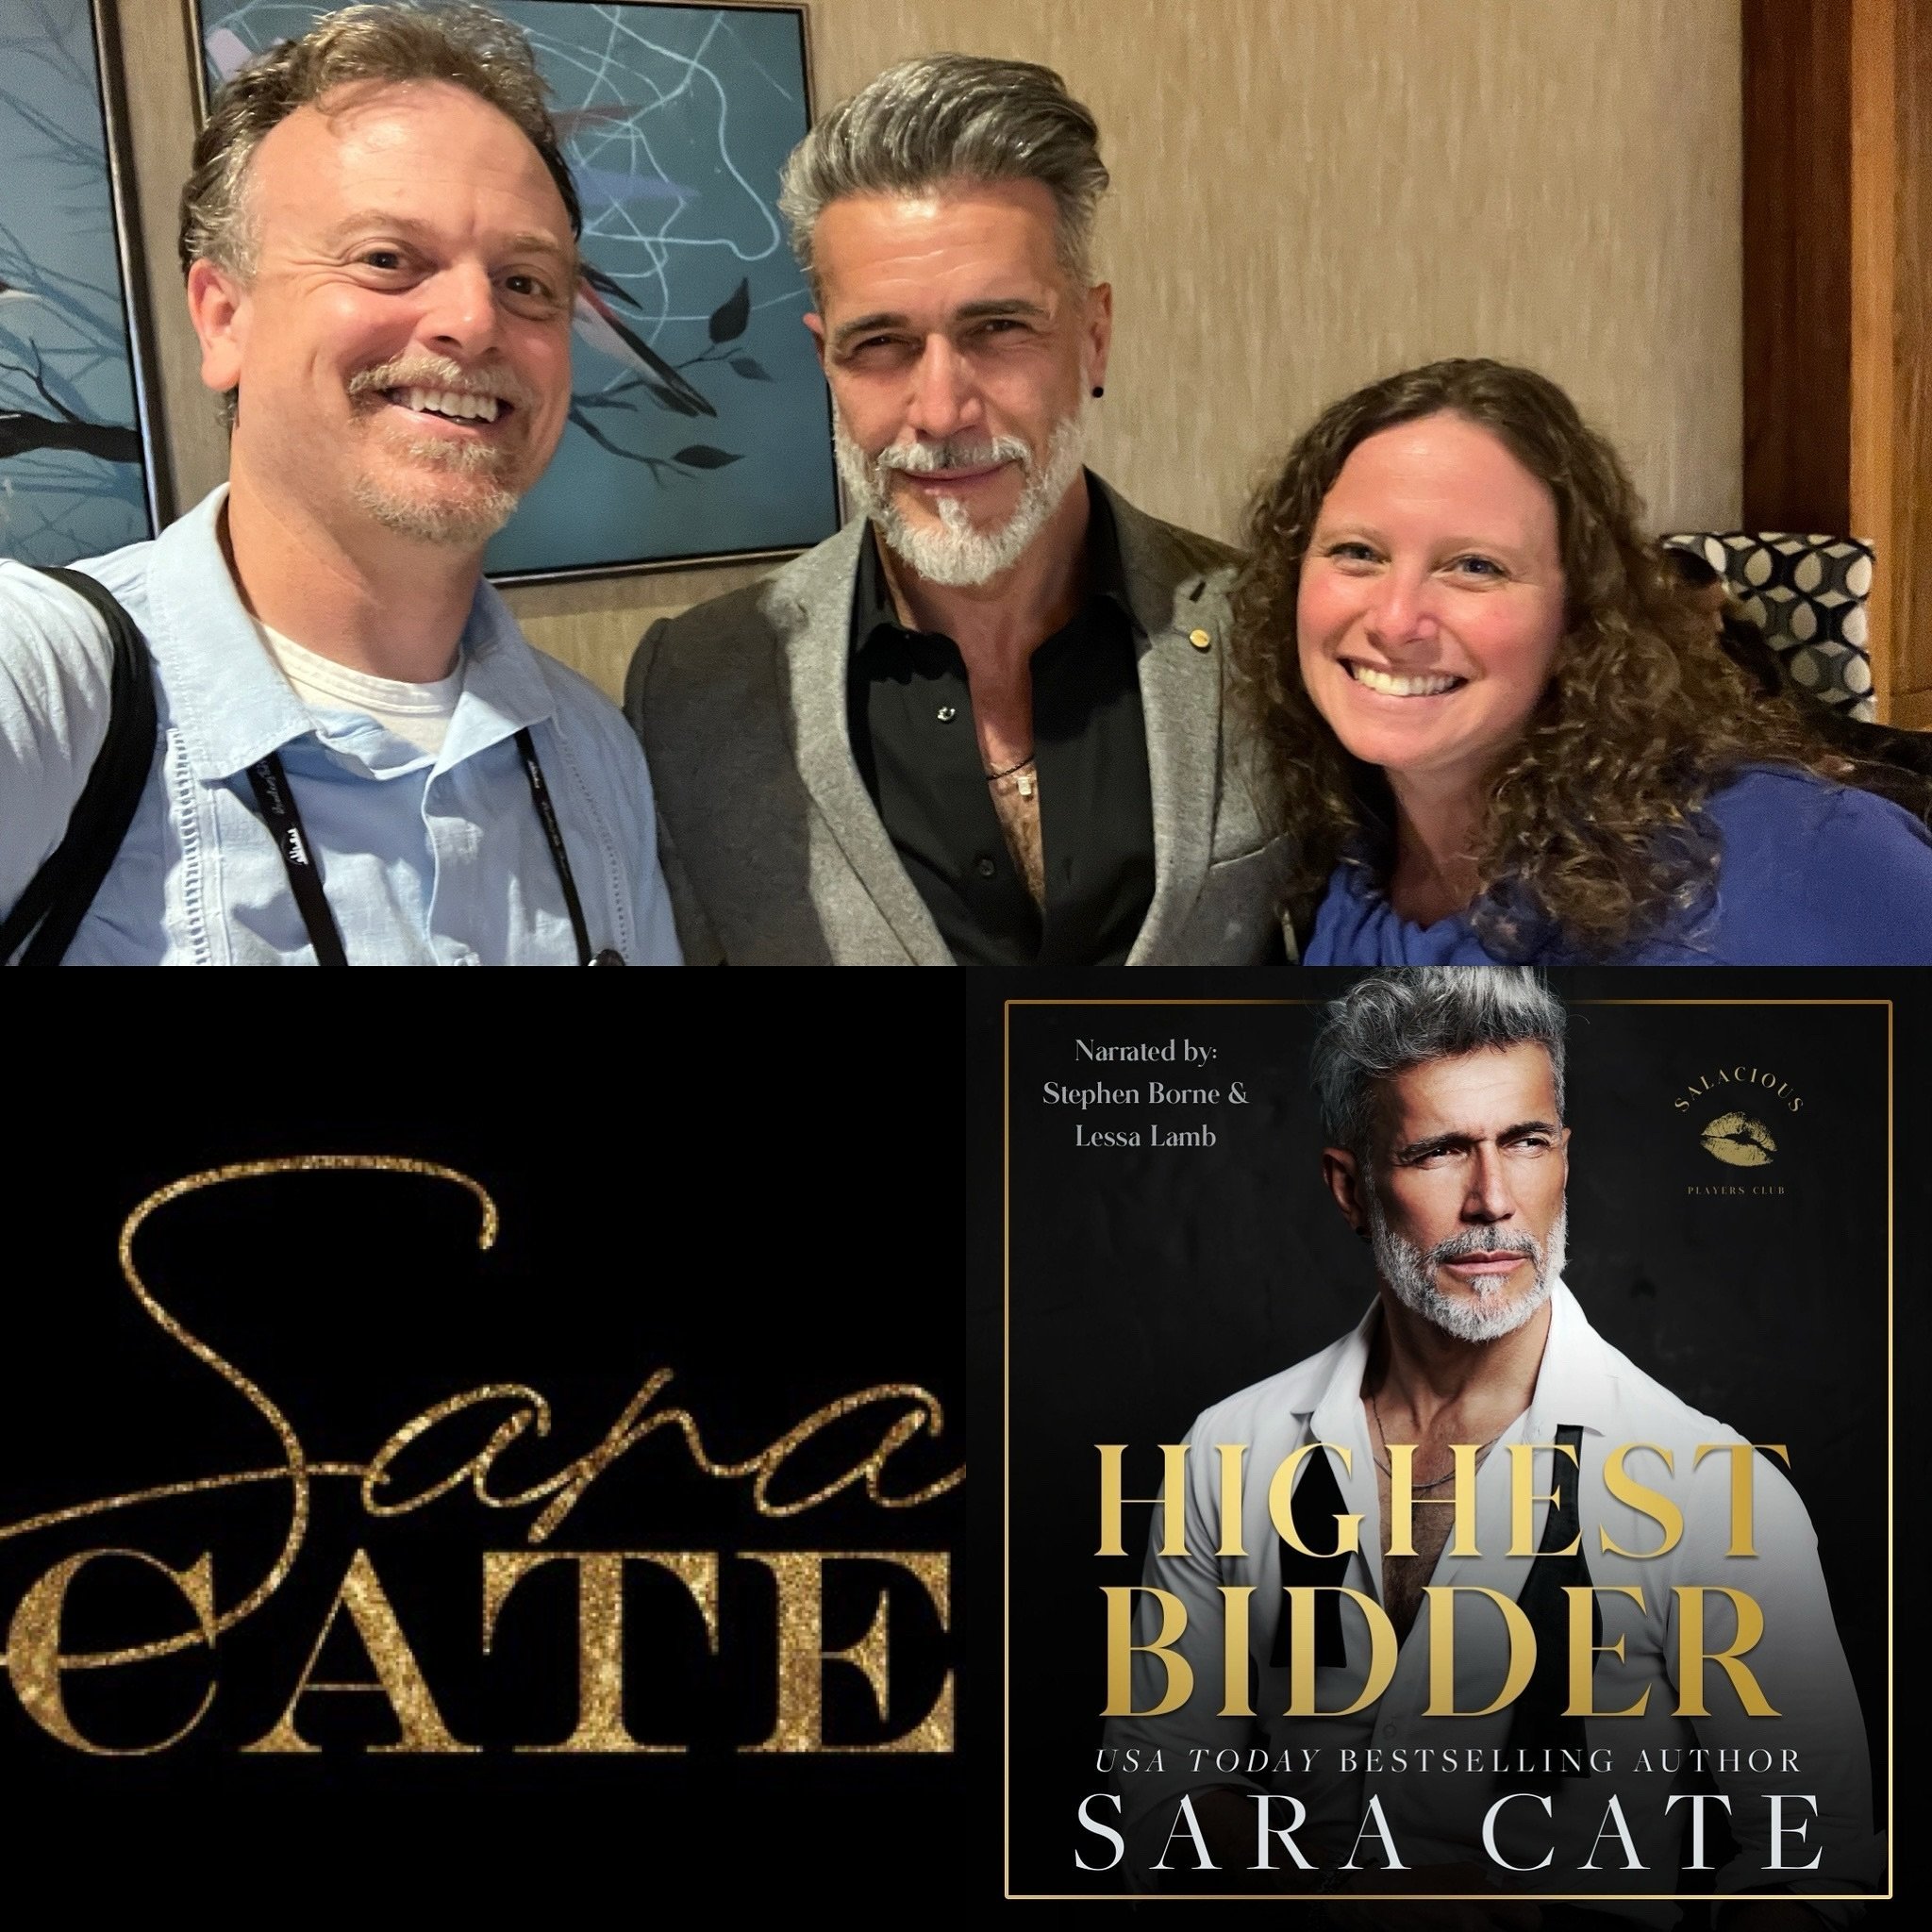 Meeting the cover model for one of the books you produced is really cool!!! Handsome and incredibly kind! 💛

#highestbidder #saracate #salaciousplayersclub #highgravityproductions #covermodel #audiobook #bestsellingauthor #contemporaryromance #billi